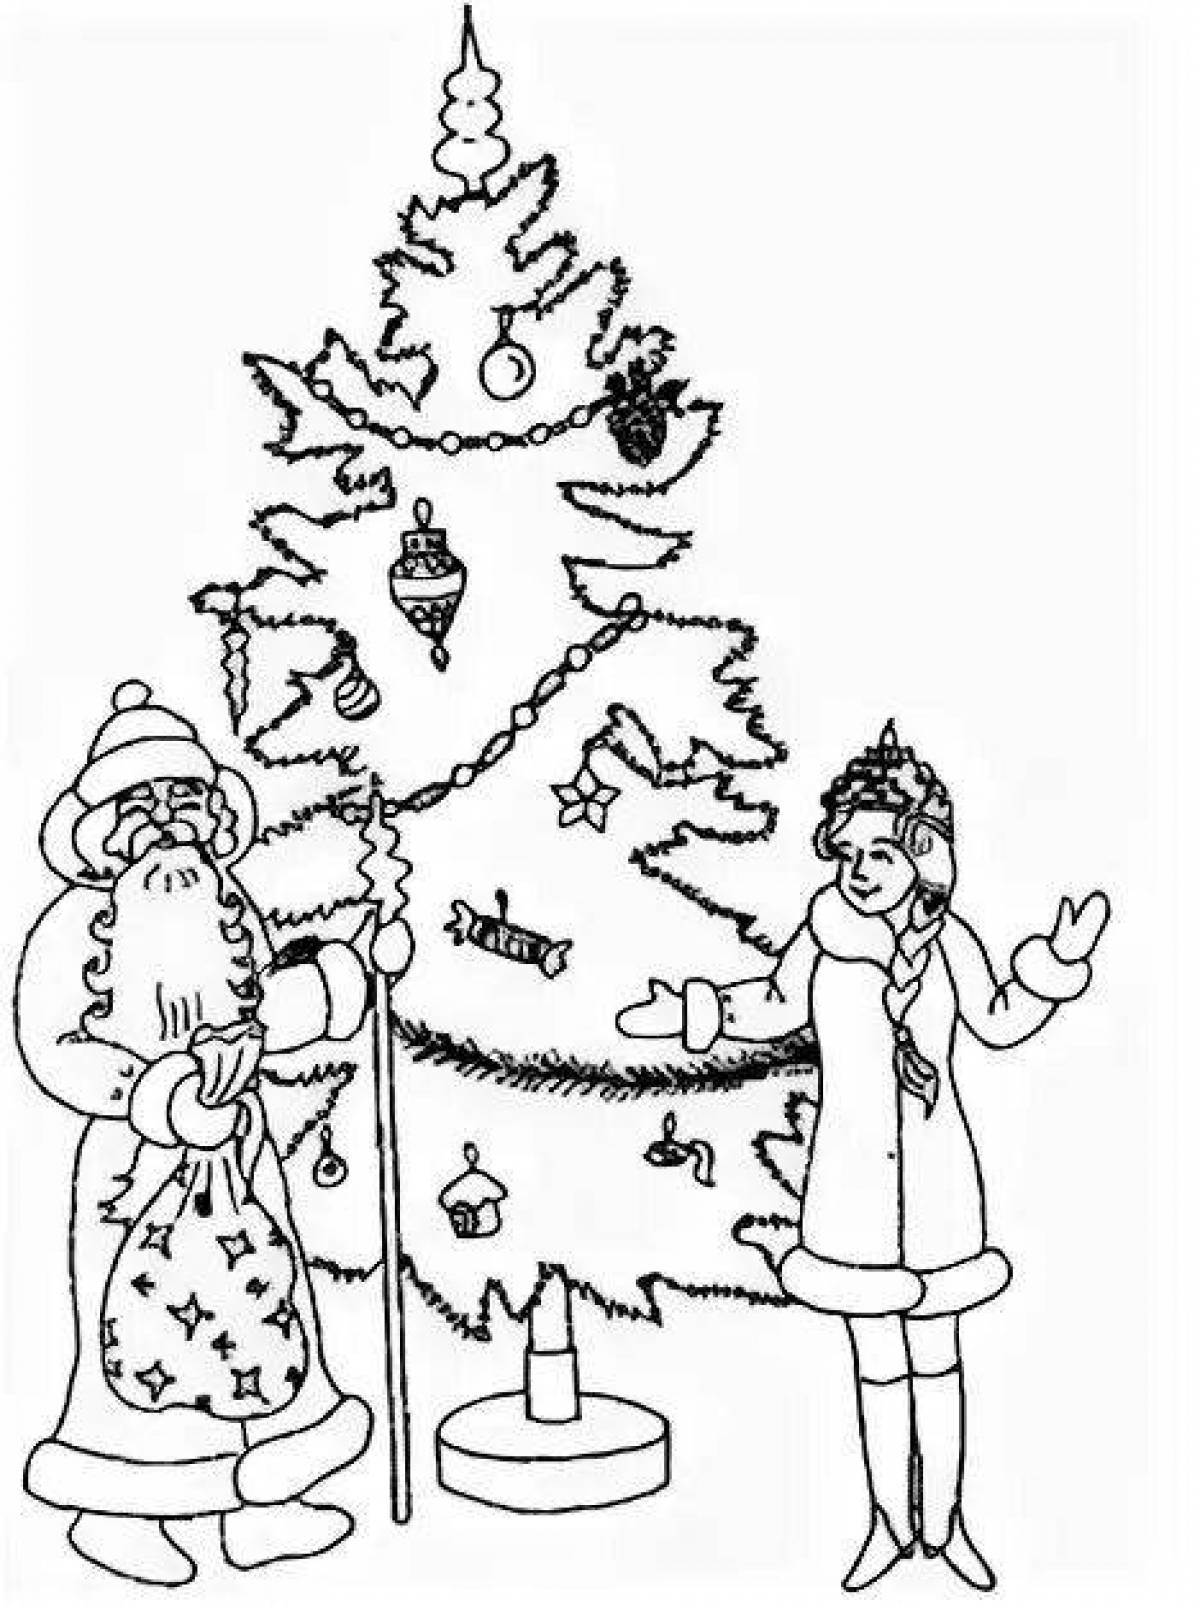 Coloring page of a violent snow maiden